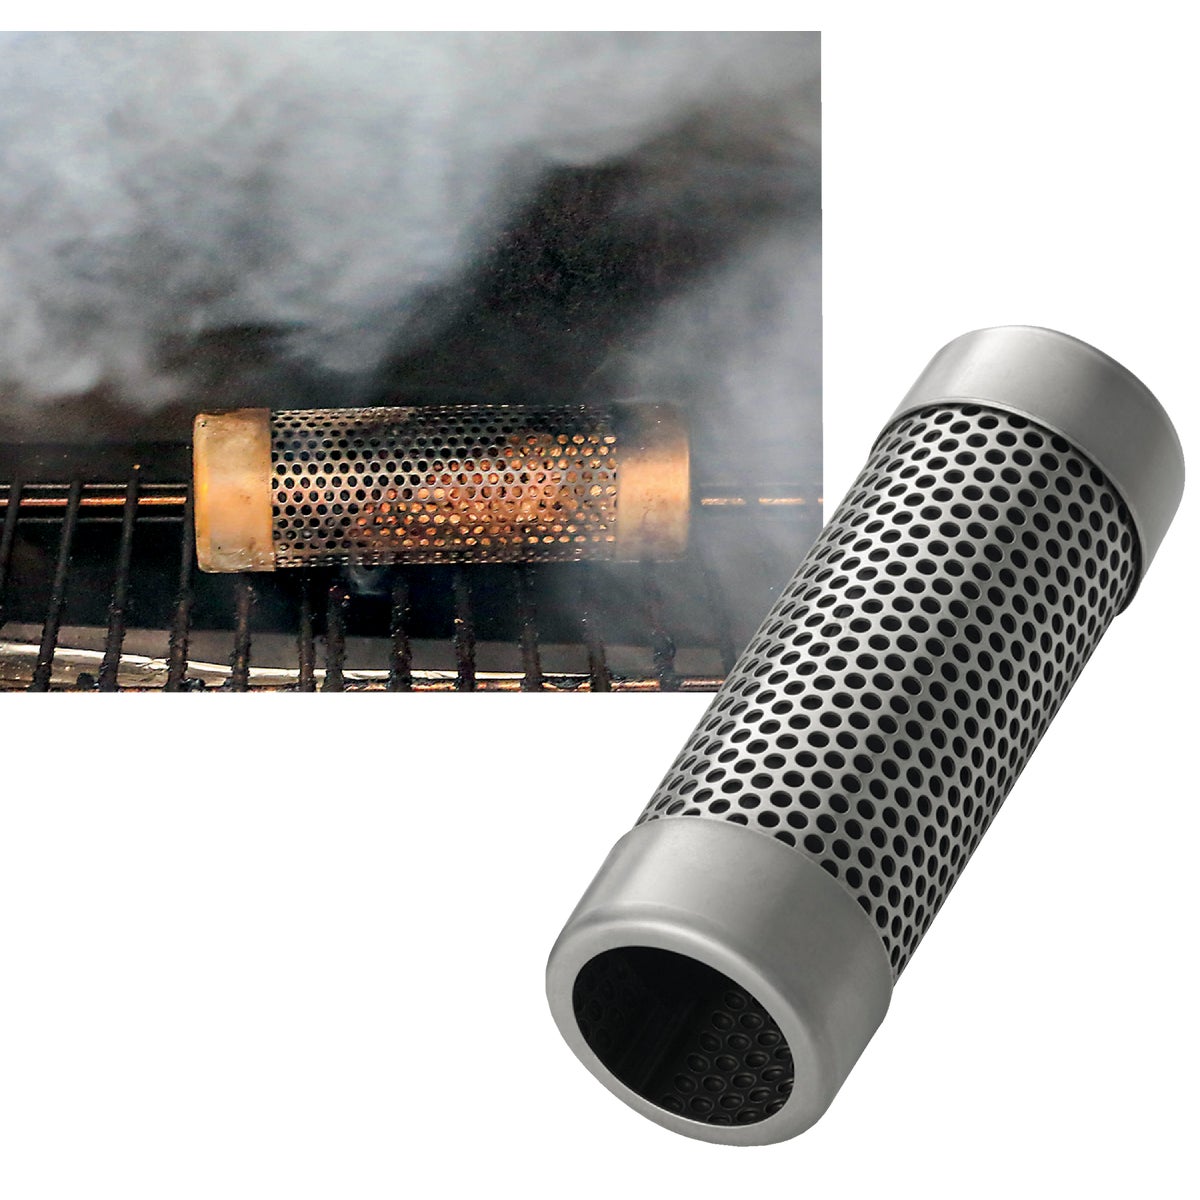 Item 801995, Lightweight, durable, and portable stainless steel smoke generator is 